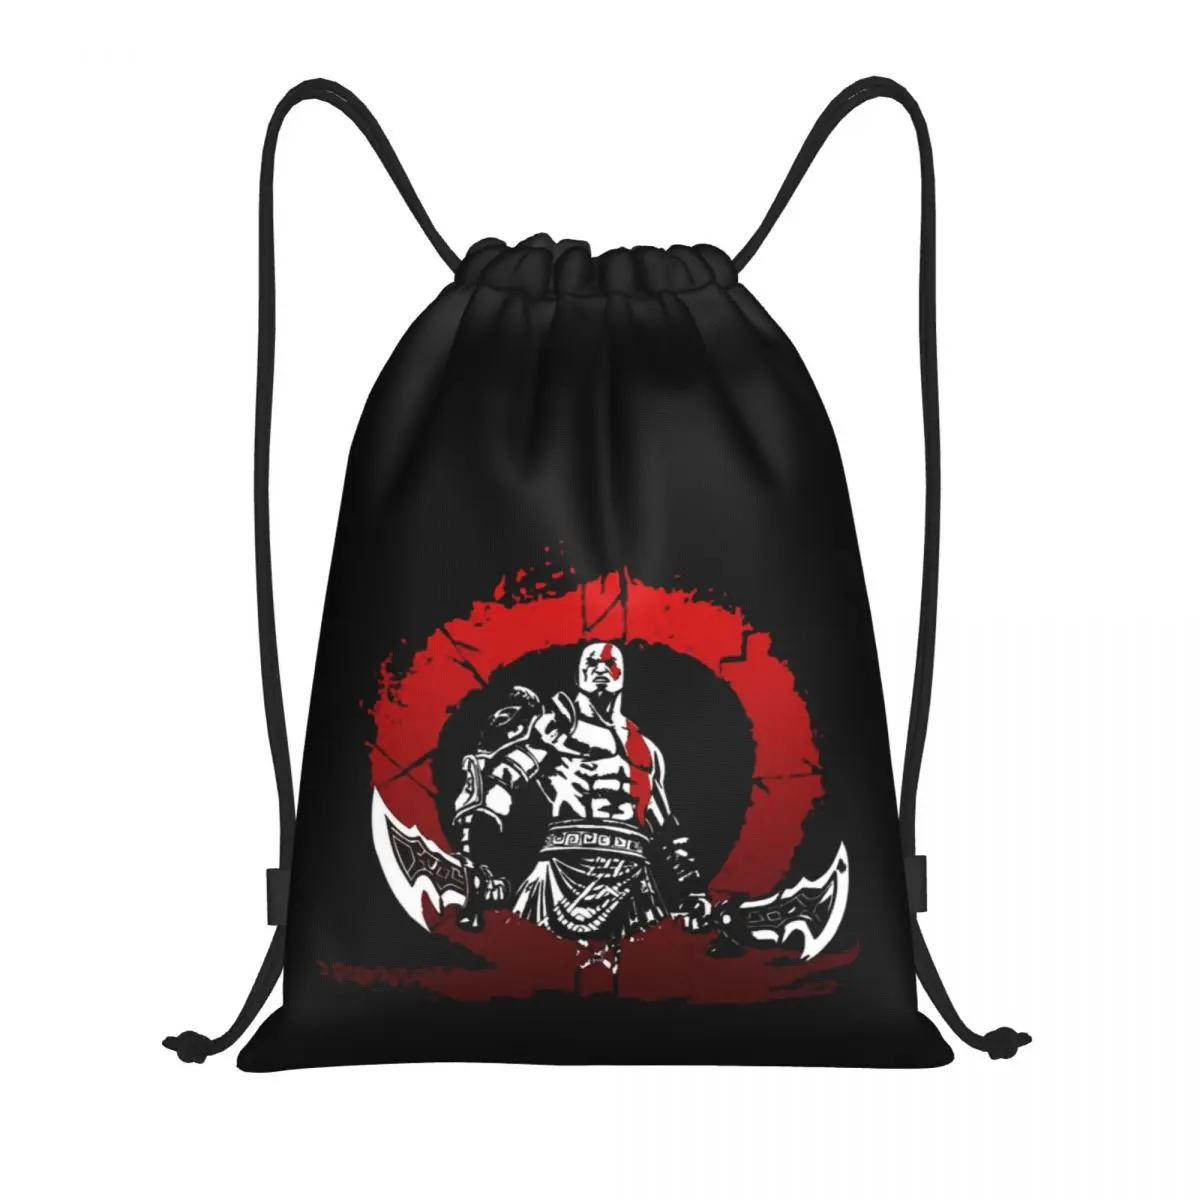 

Kratos God Of War 2 Ragnarok Is Coming 6 Drawstring Bags Gym Bag Funny Infantry pack Cosy Backpack Humor Graphic